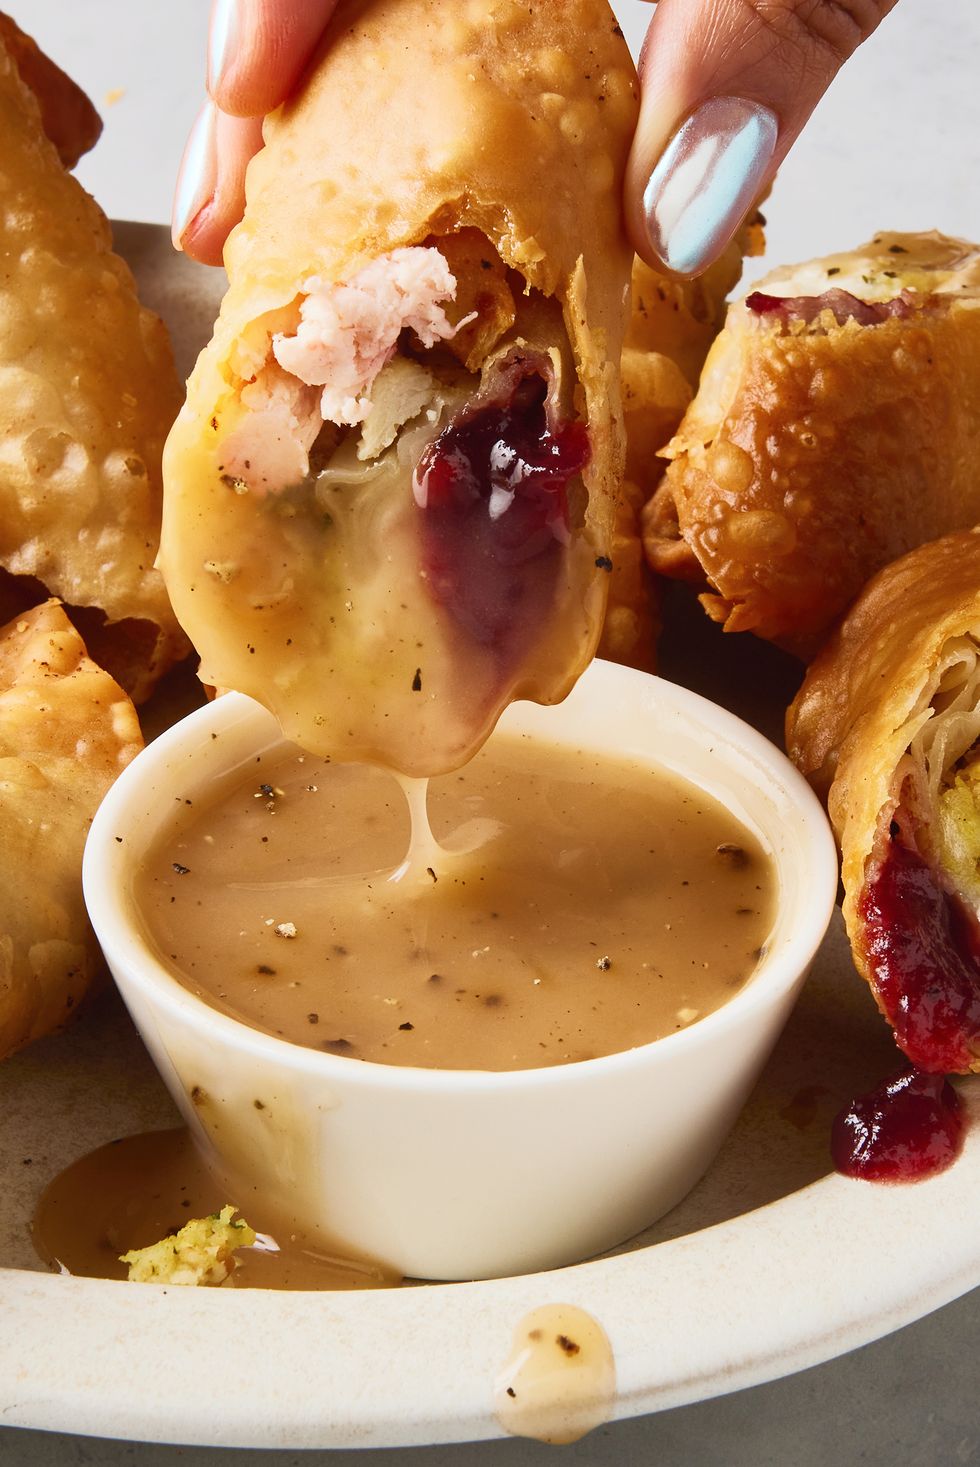 egg rolls stuffed with thanksgiving ingredients like cranberry sauce, stuffing, and mashed potatoes alongside a ramekin of gravy